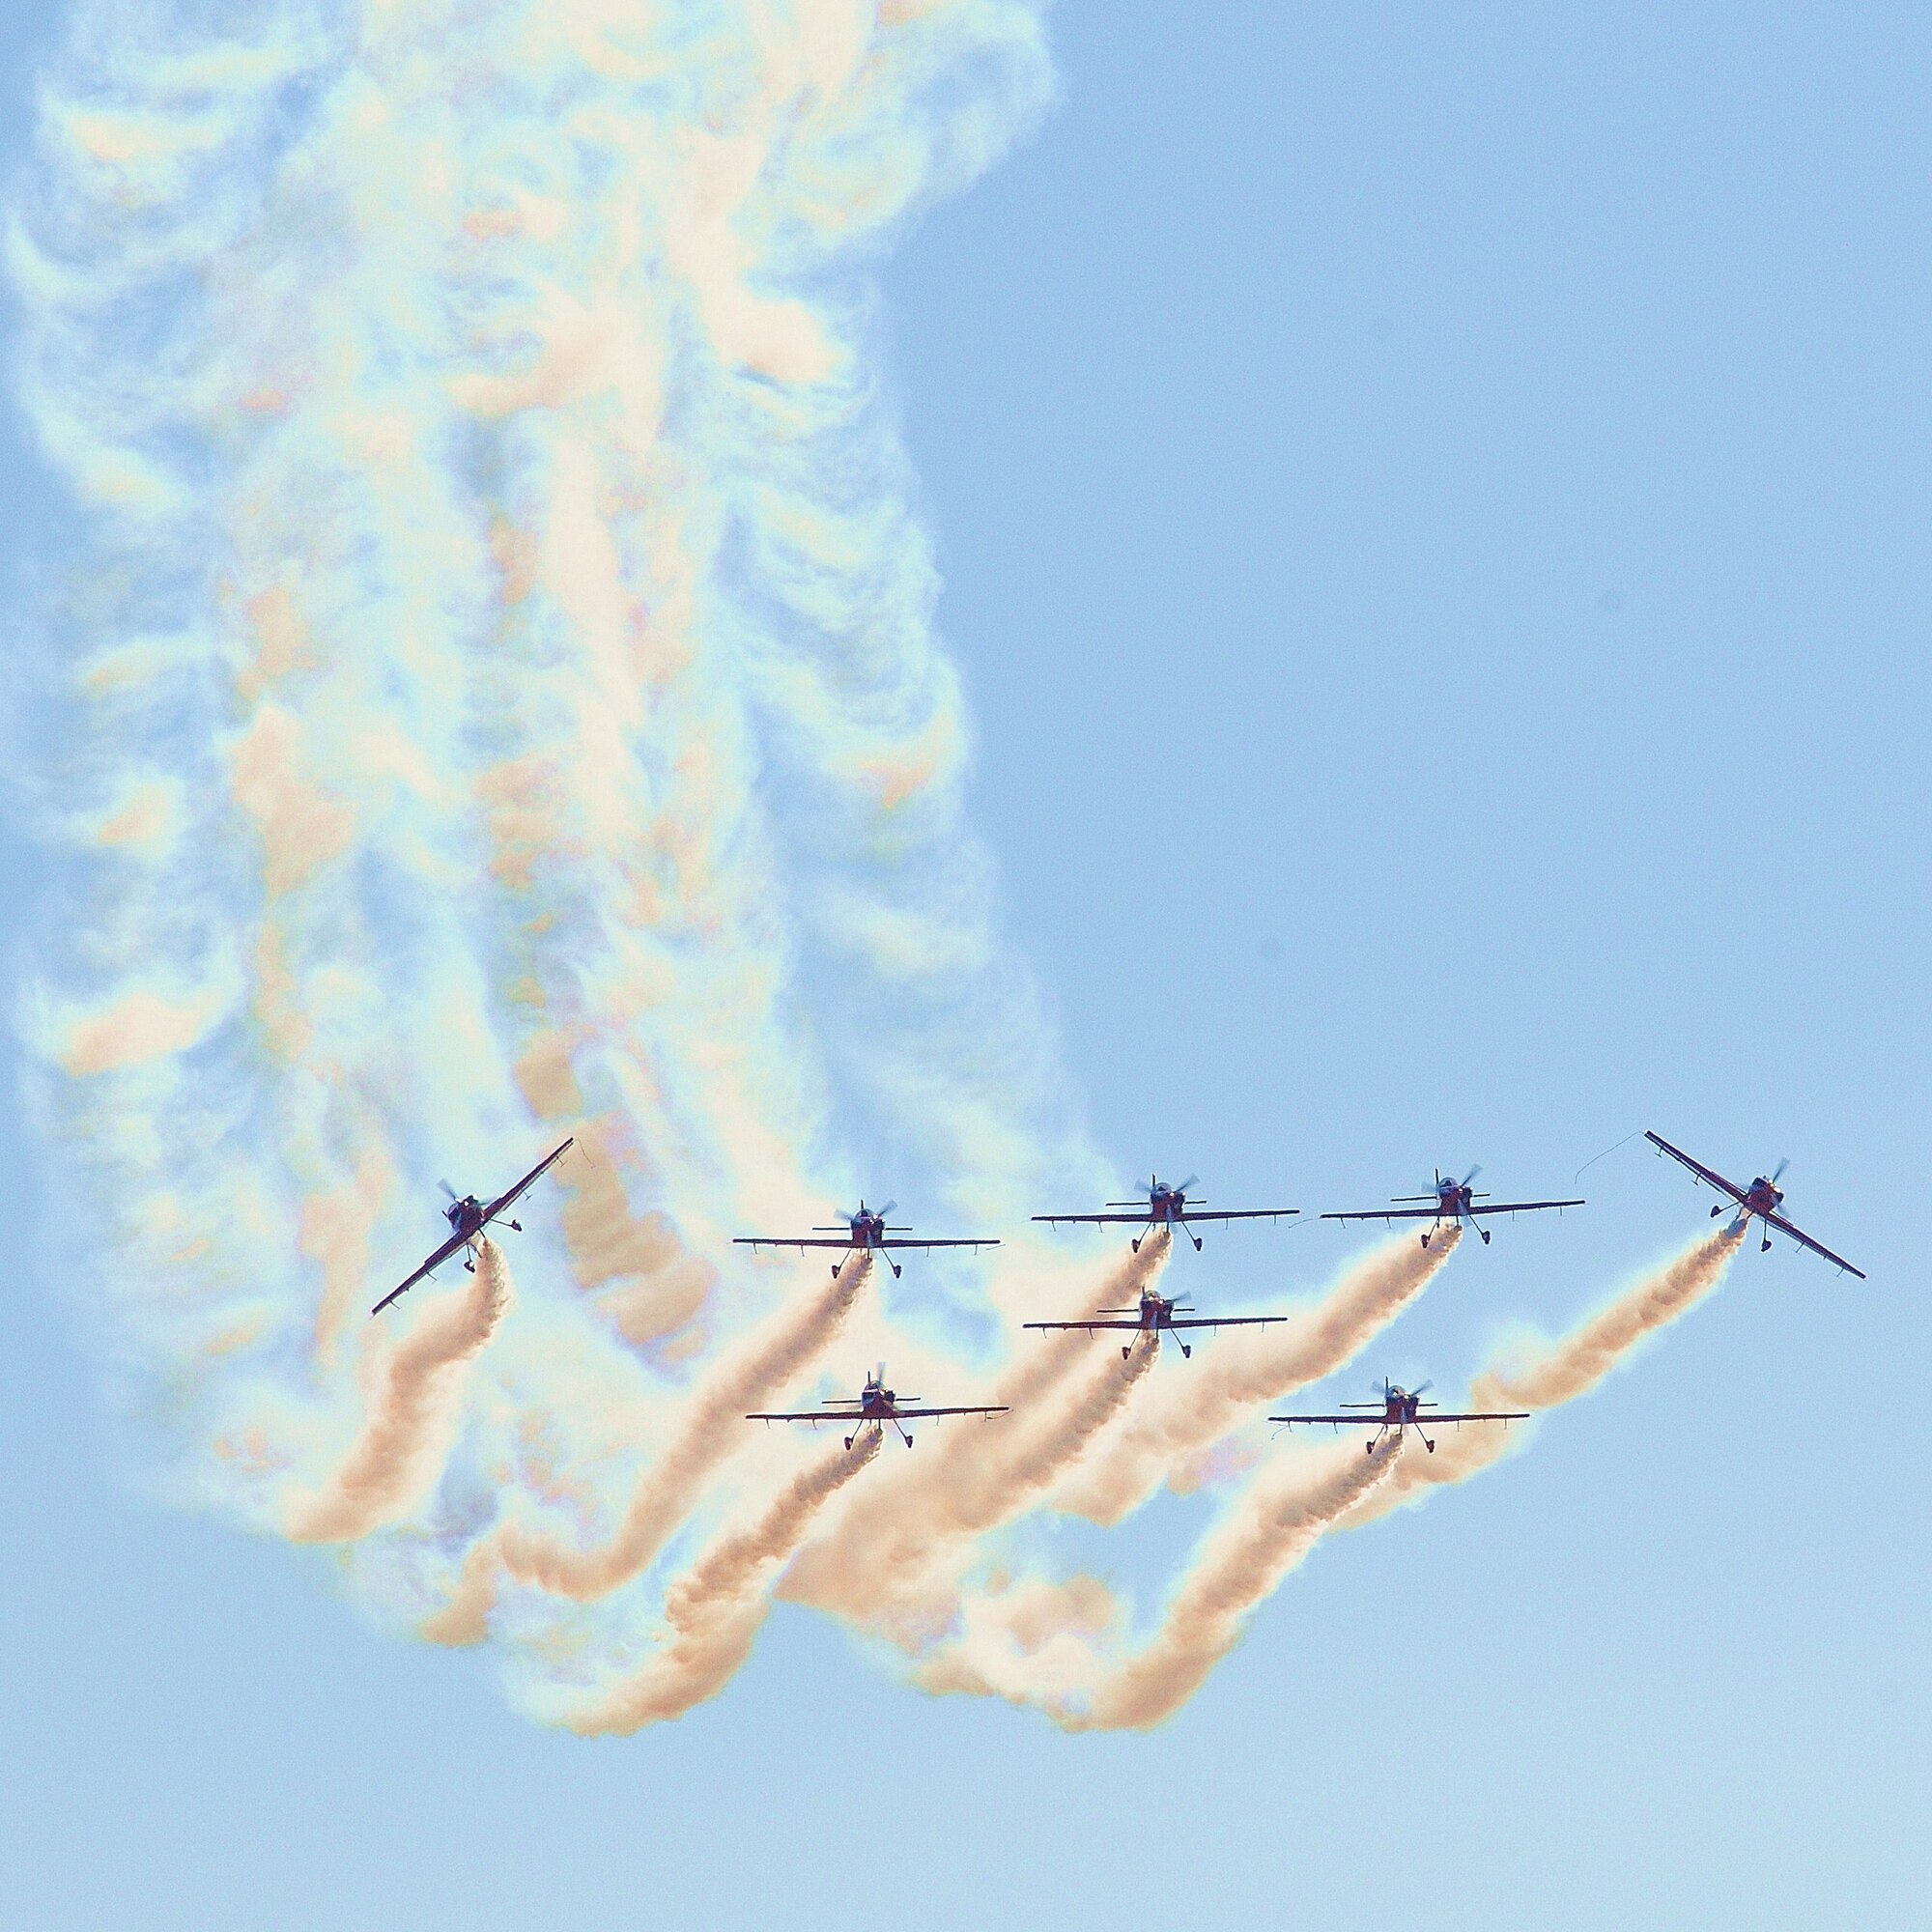 MARRAKECH, Morocco -- The Royal Moroccan Air Force aerobatic display team, the Green March, flies during the Marakech Aeroexpo 2010 Jan. 27. The CAP 232 aircraft are flown in close formation while tied together with ropes. Approximately 50 Airmen and four aircraft from bases in the U.S. and Europe are participating in the Aeroexpo Marrakech 2010 international air show in Morocco which began Wednesday and runs through Saturday. (U.S. Air Force photo by Staff Sgt. Stefanie Torres)